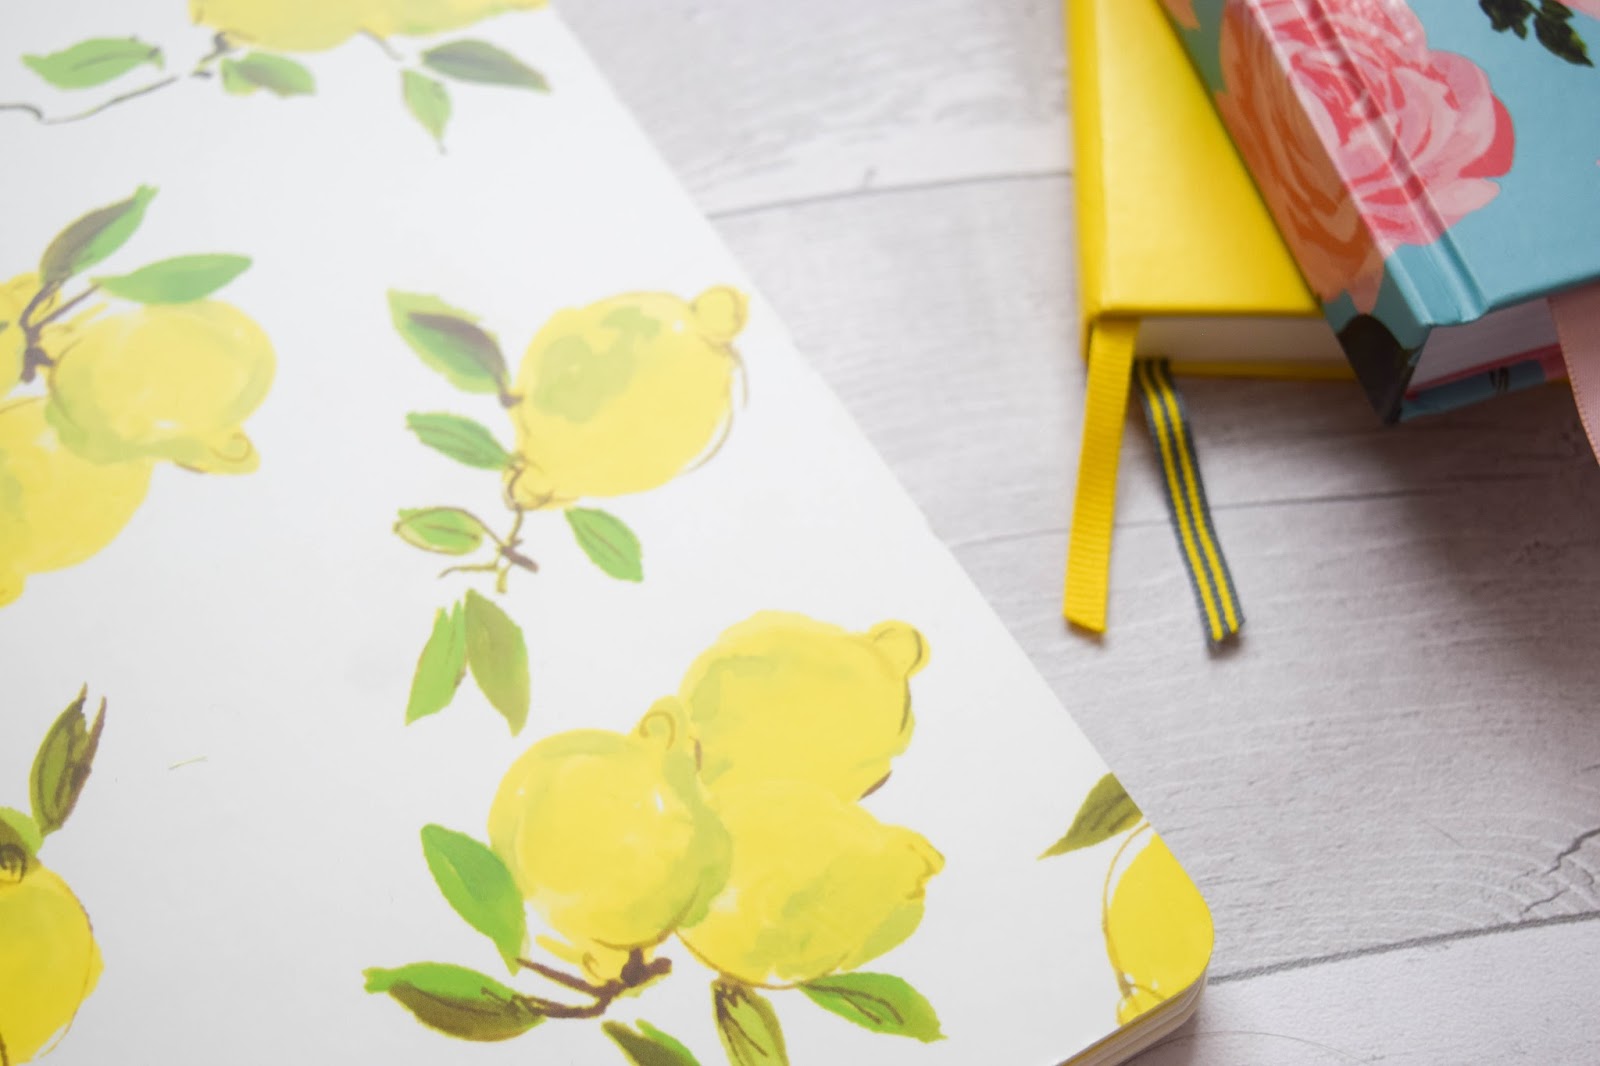 Stationery Kate Spade Lemon Spiral Notebook At Home With Cat